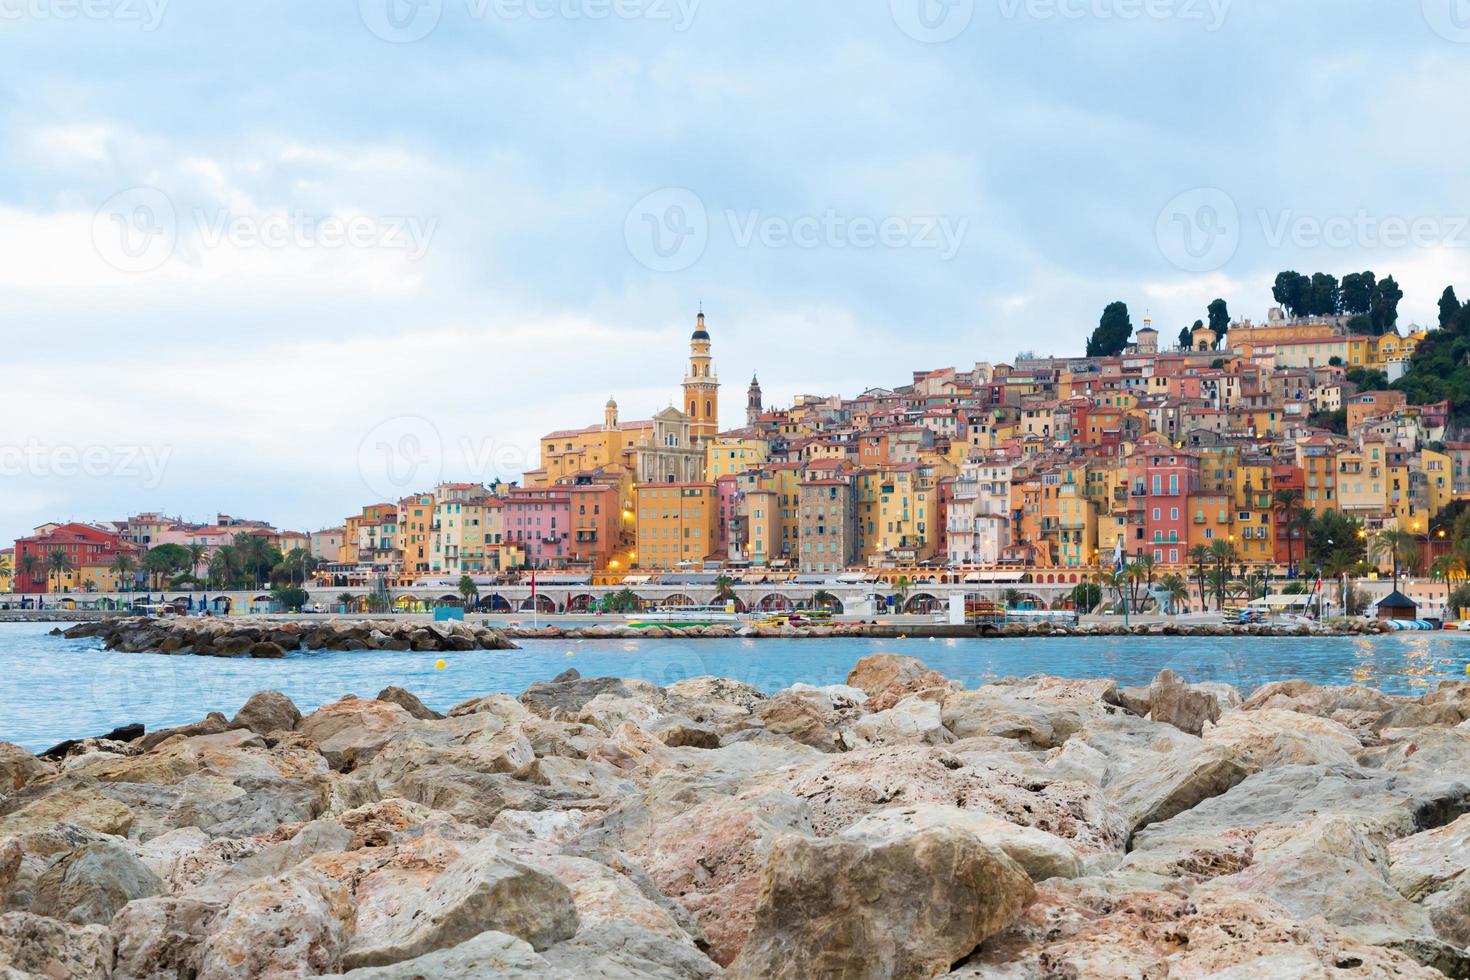 Menton on the French Riviera, named the Coast Azur, located in the South of France at sunrise photo